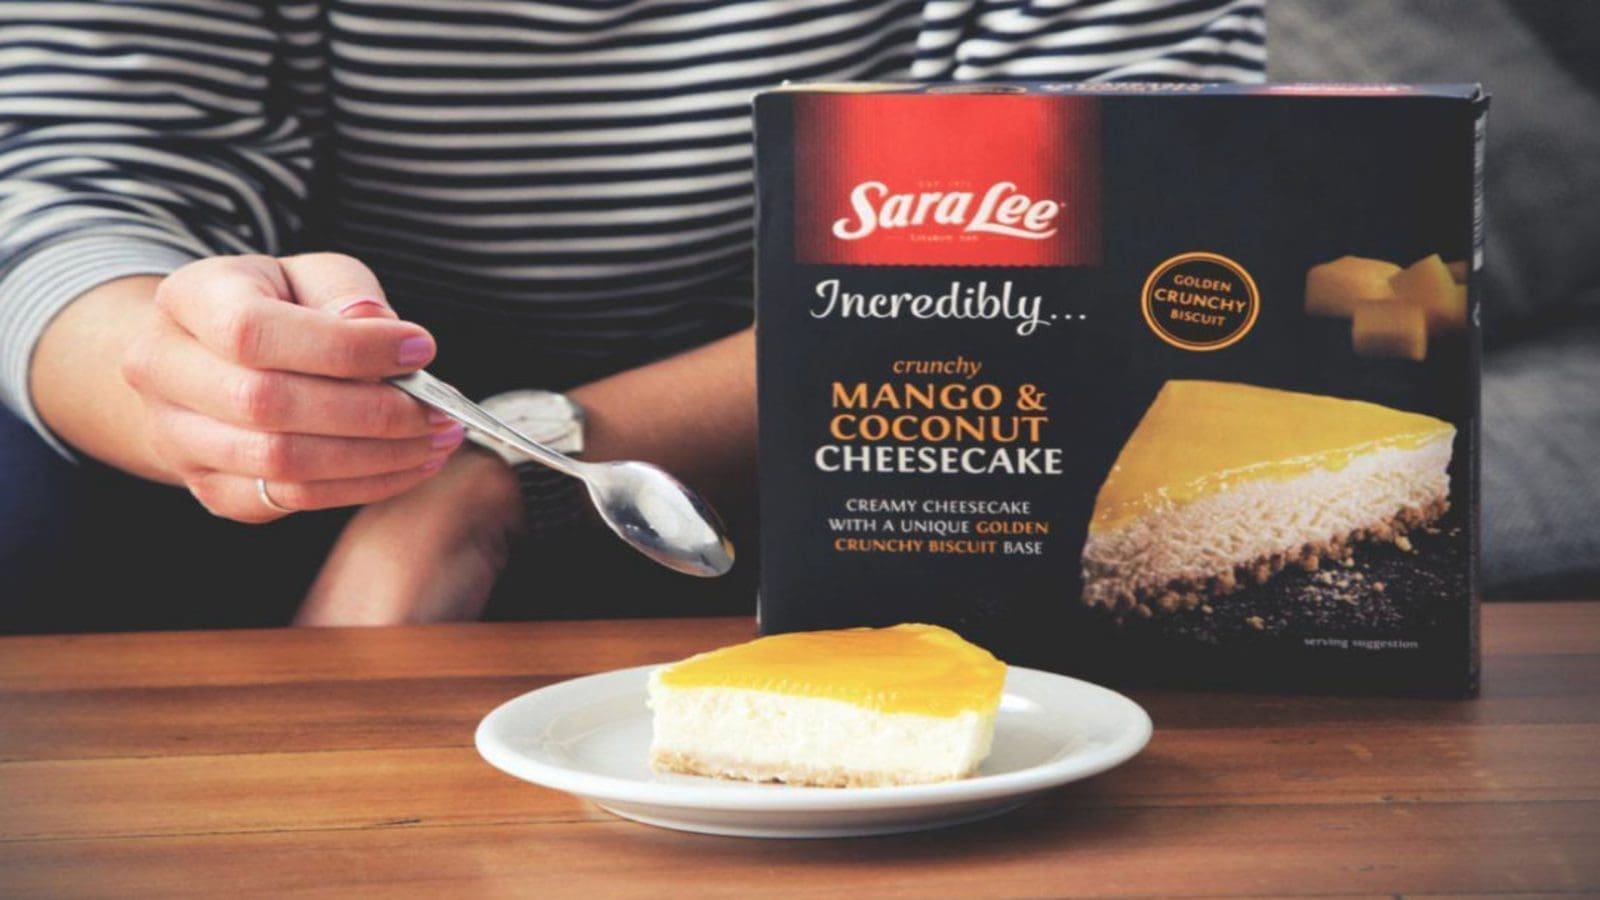 SIO acquires Sara Lee desserts and baked foods business in Australia